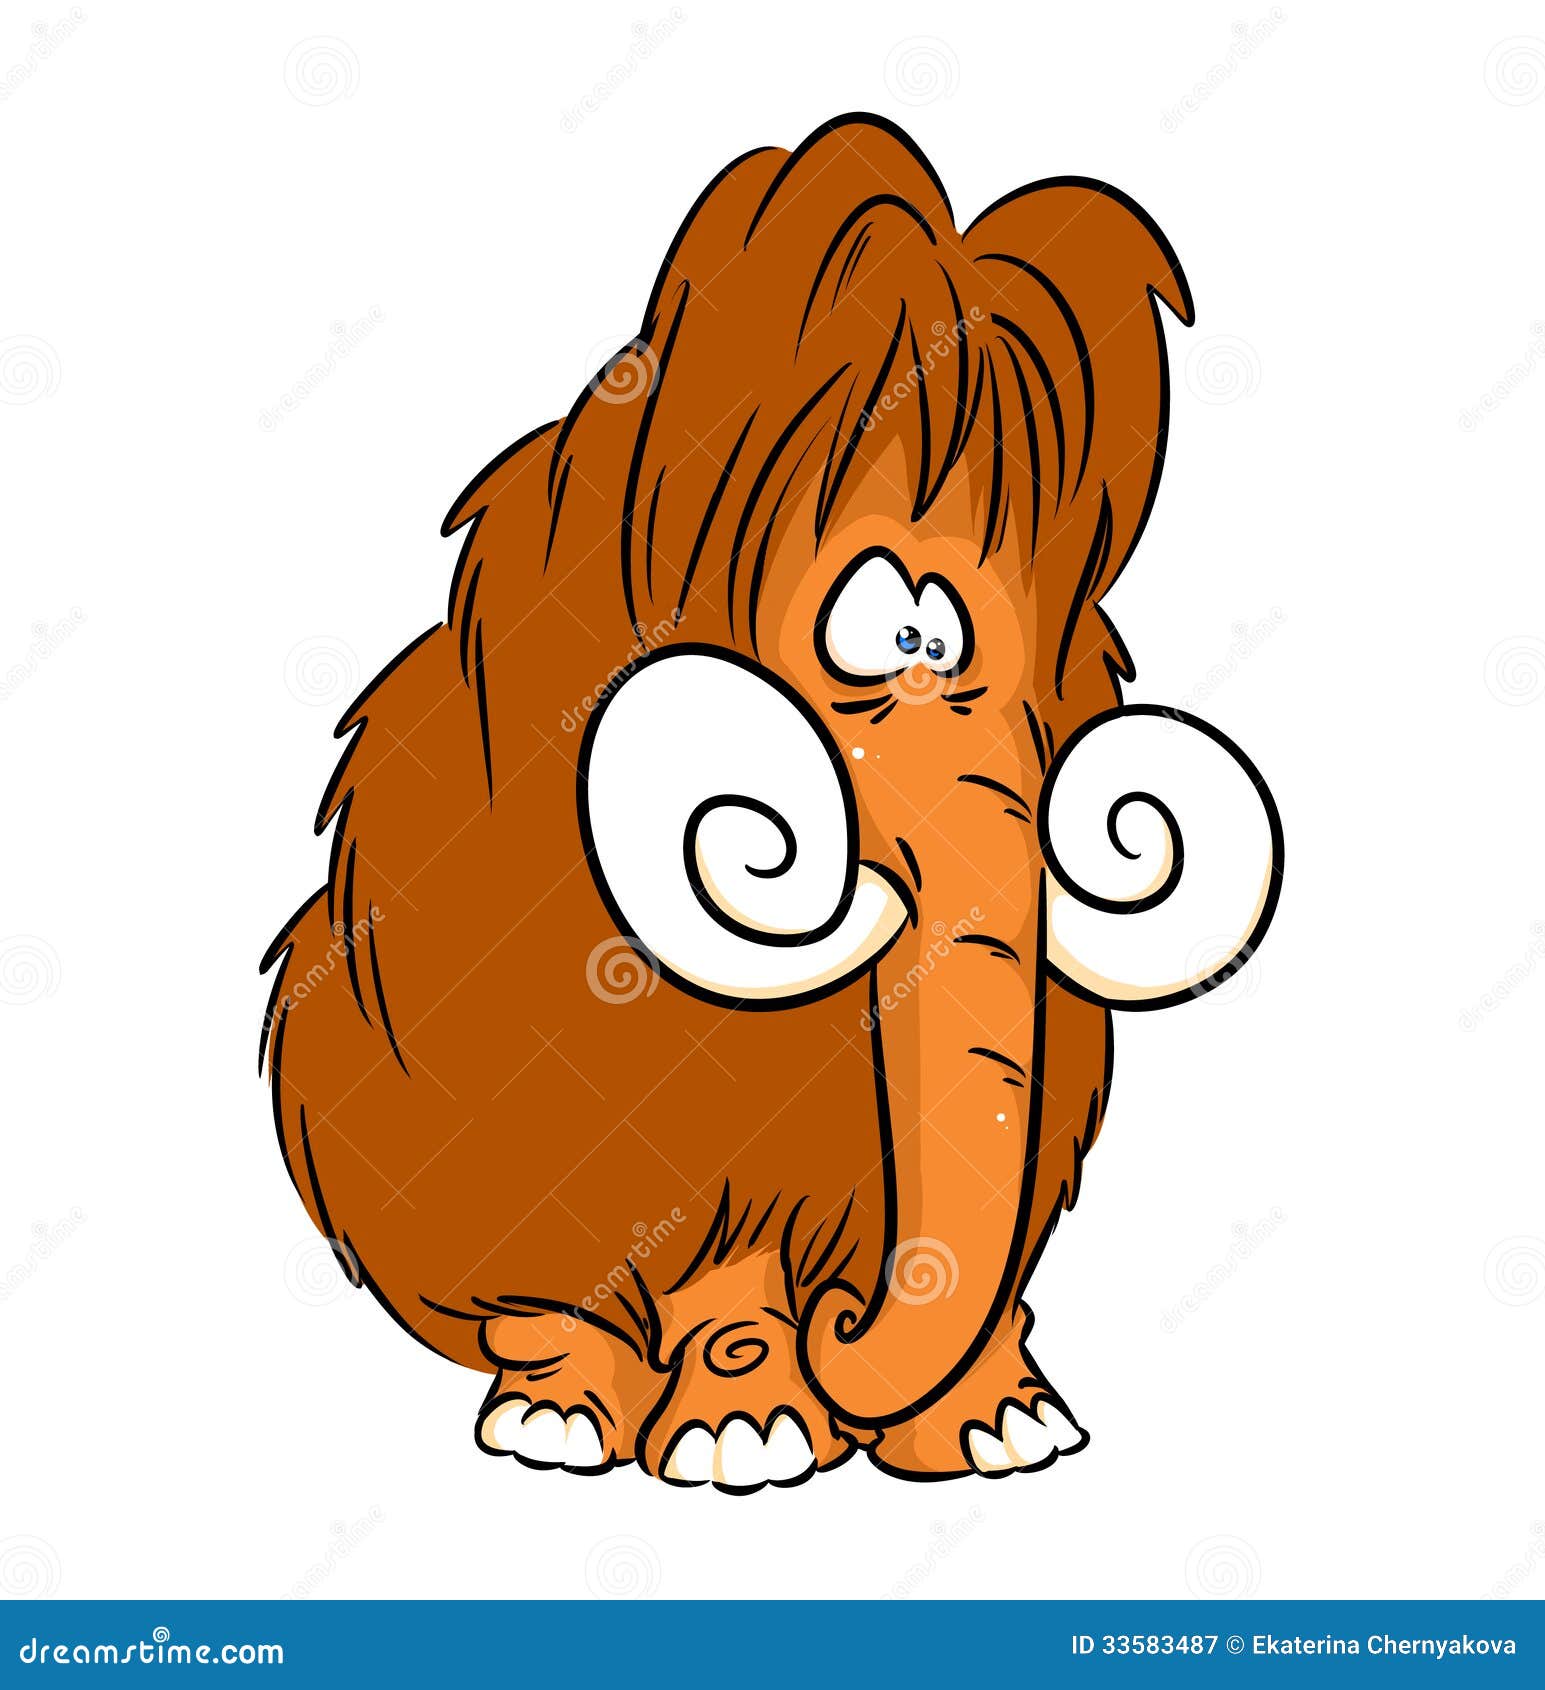 clipart of early man - photo #21